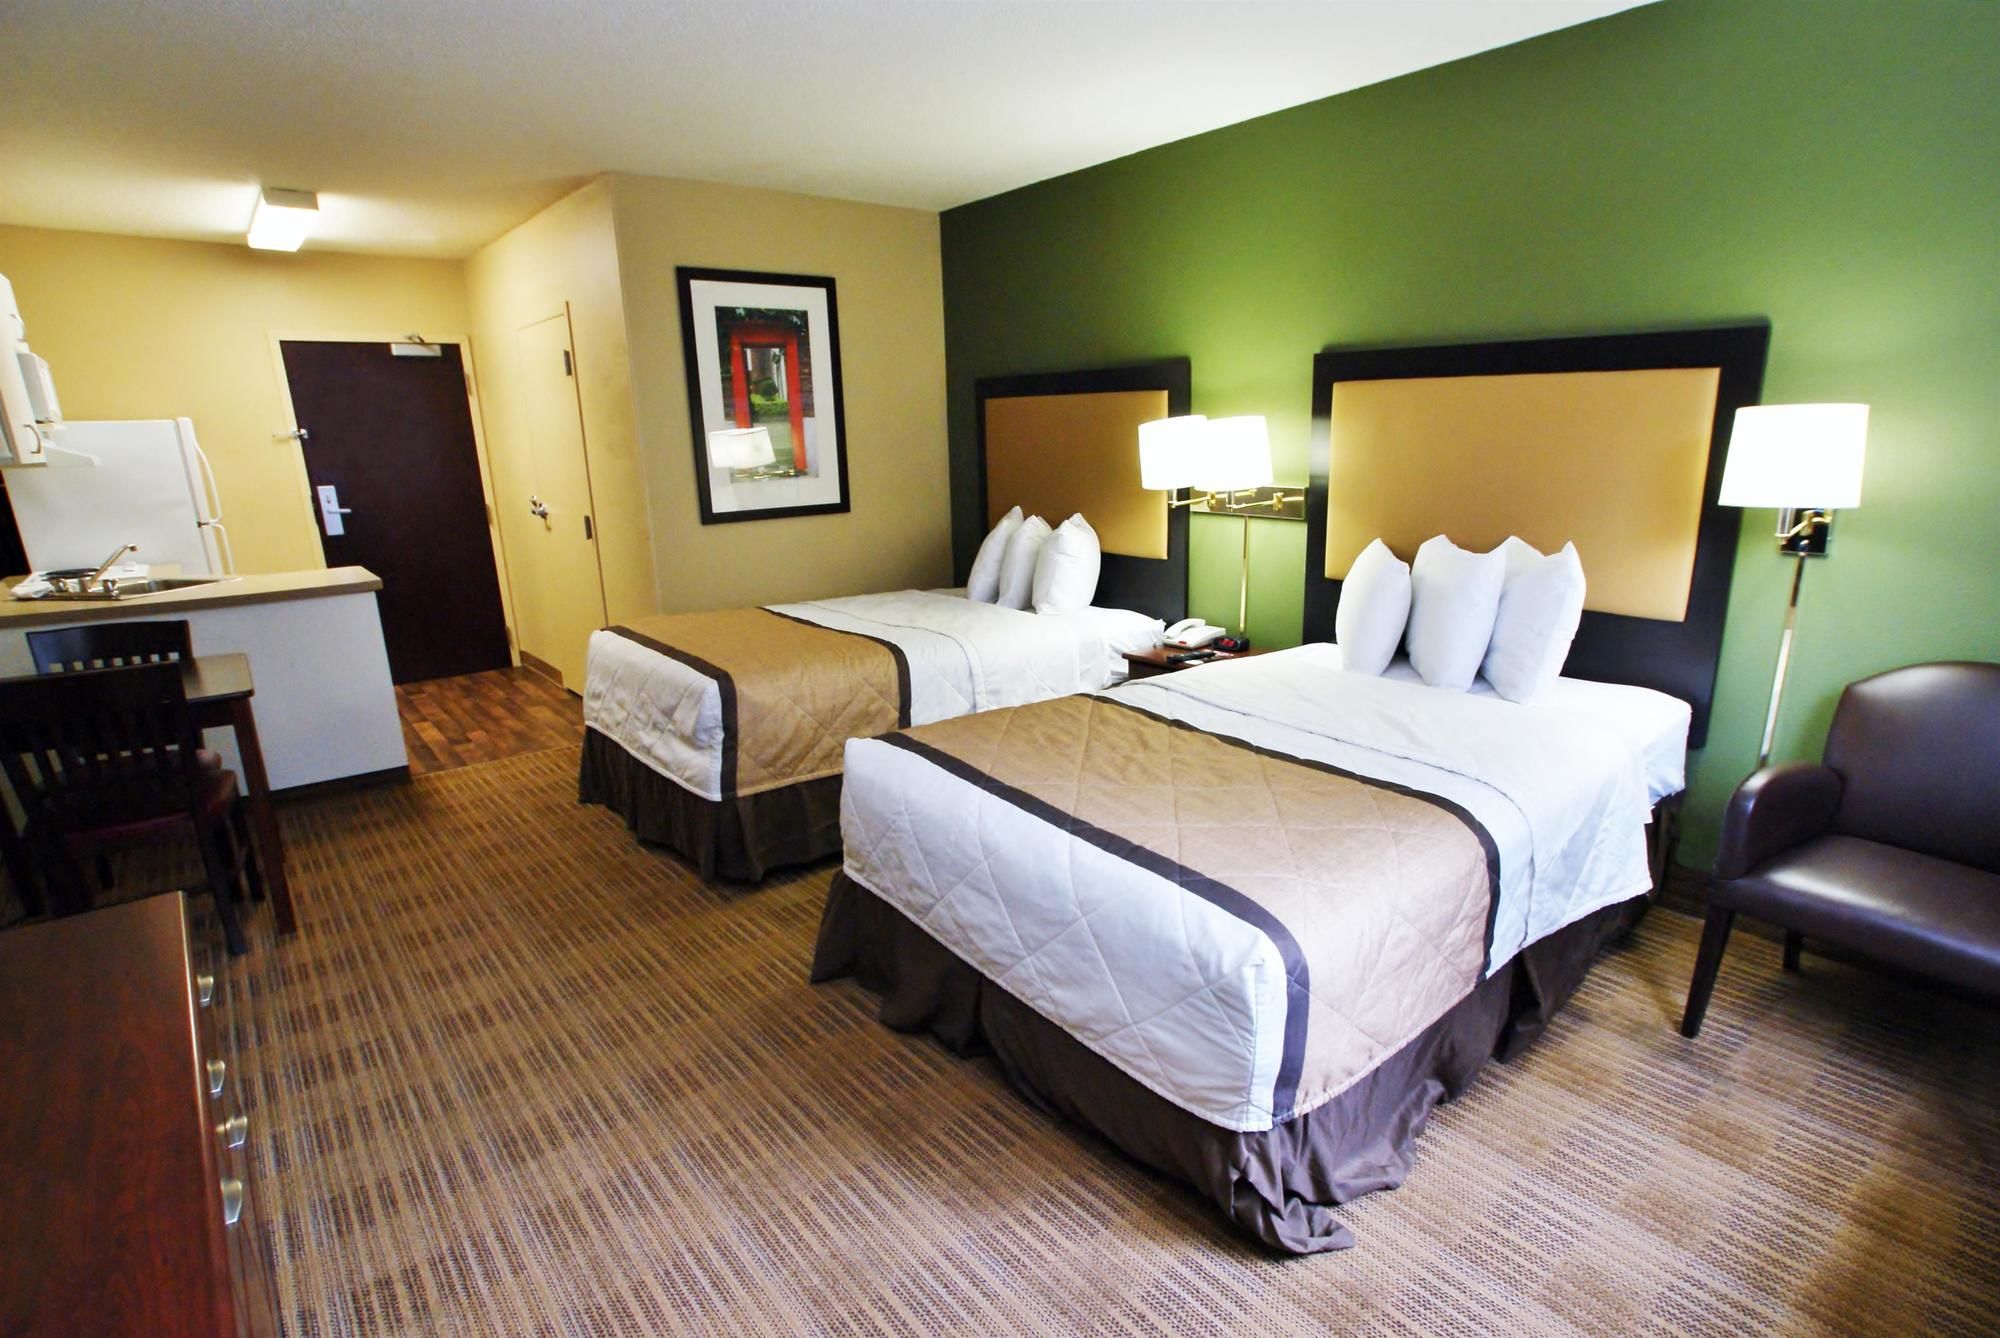 Extended Stay America Palm Springs Airport